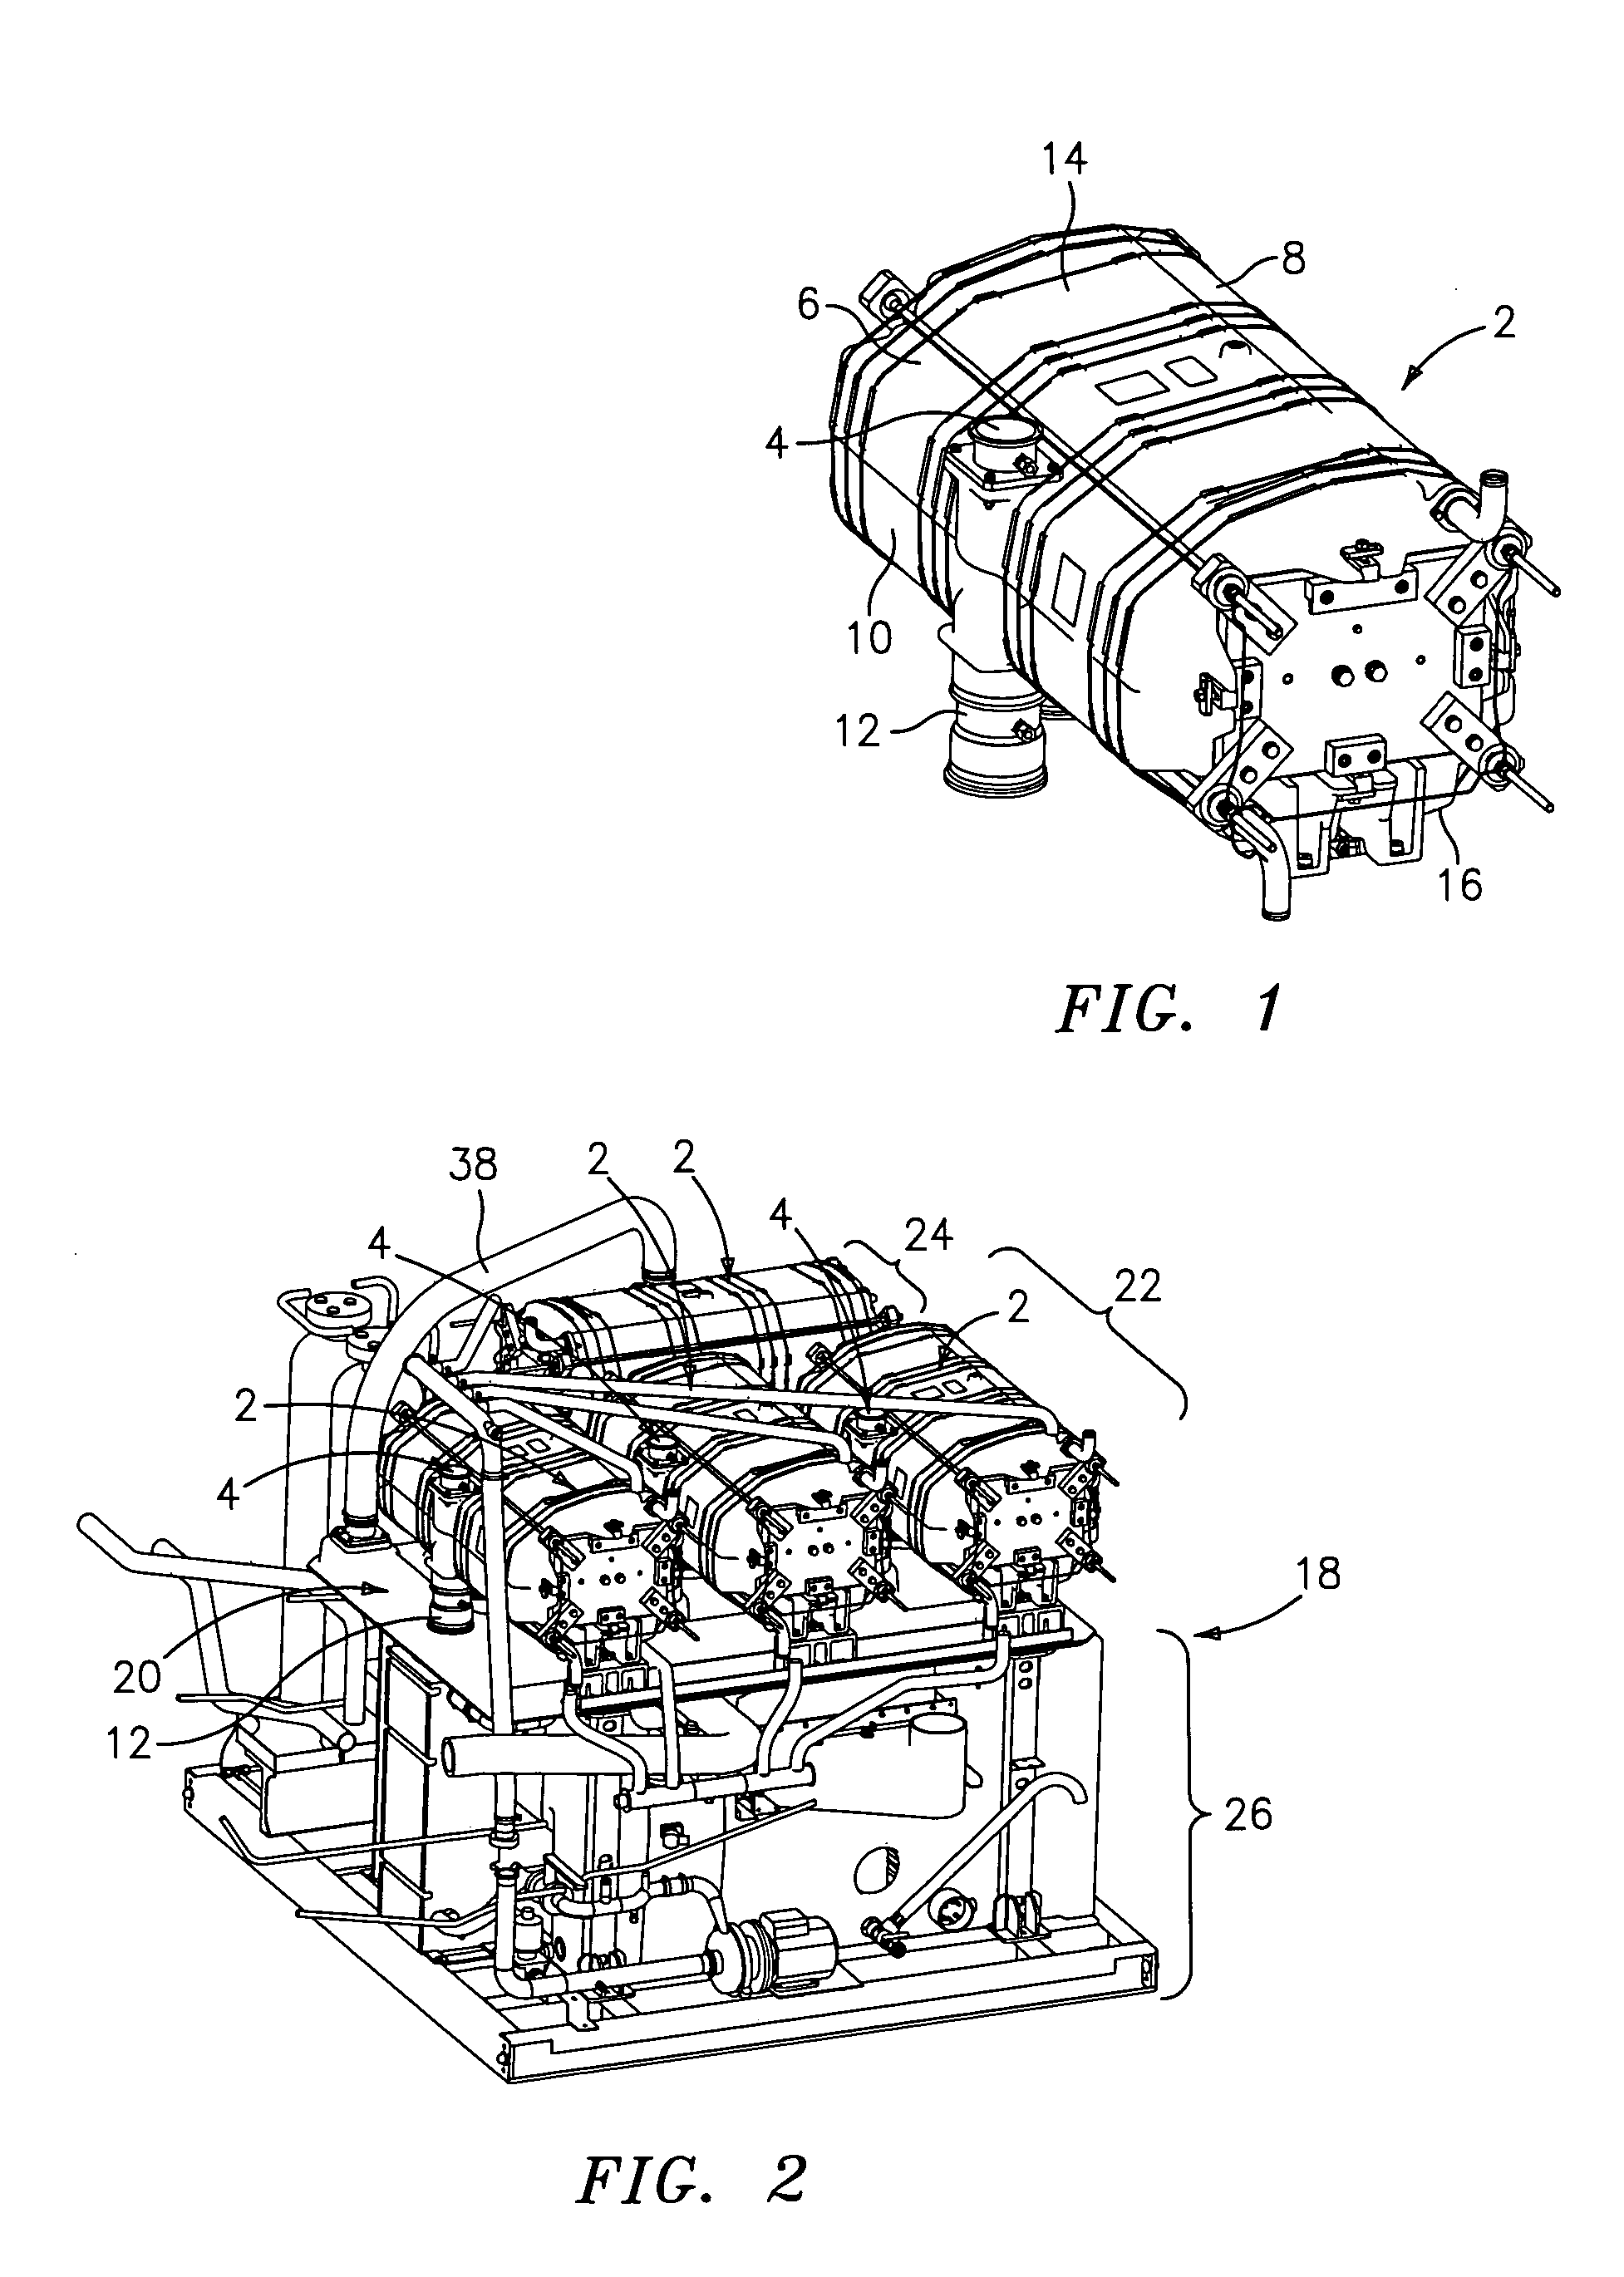 Fuel and air flow control in a multi-stack fuel cell power plant